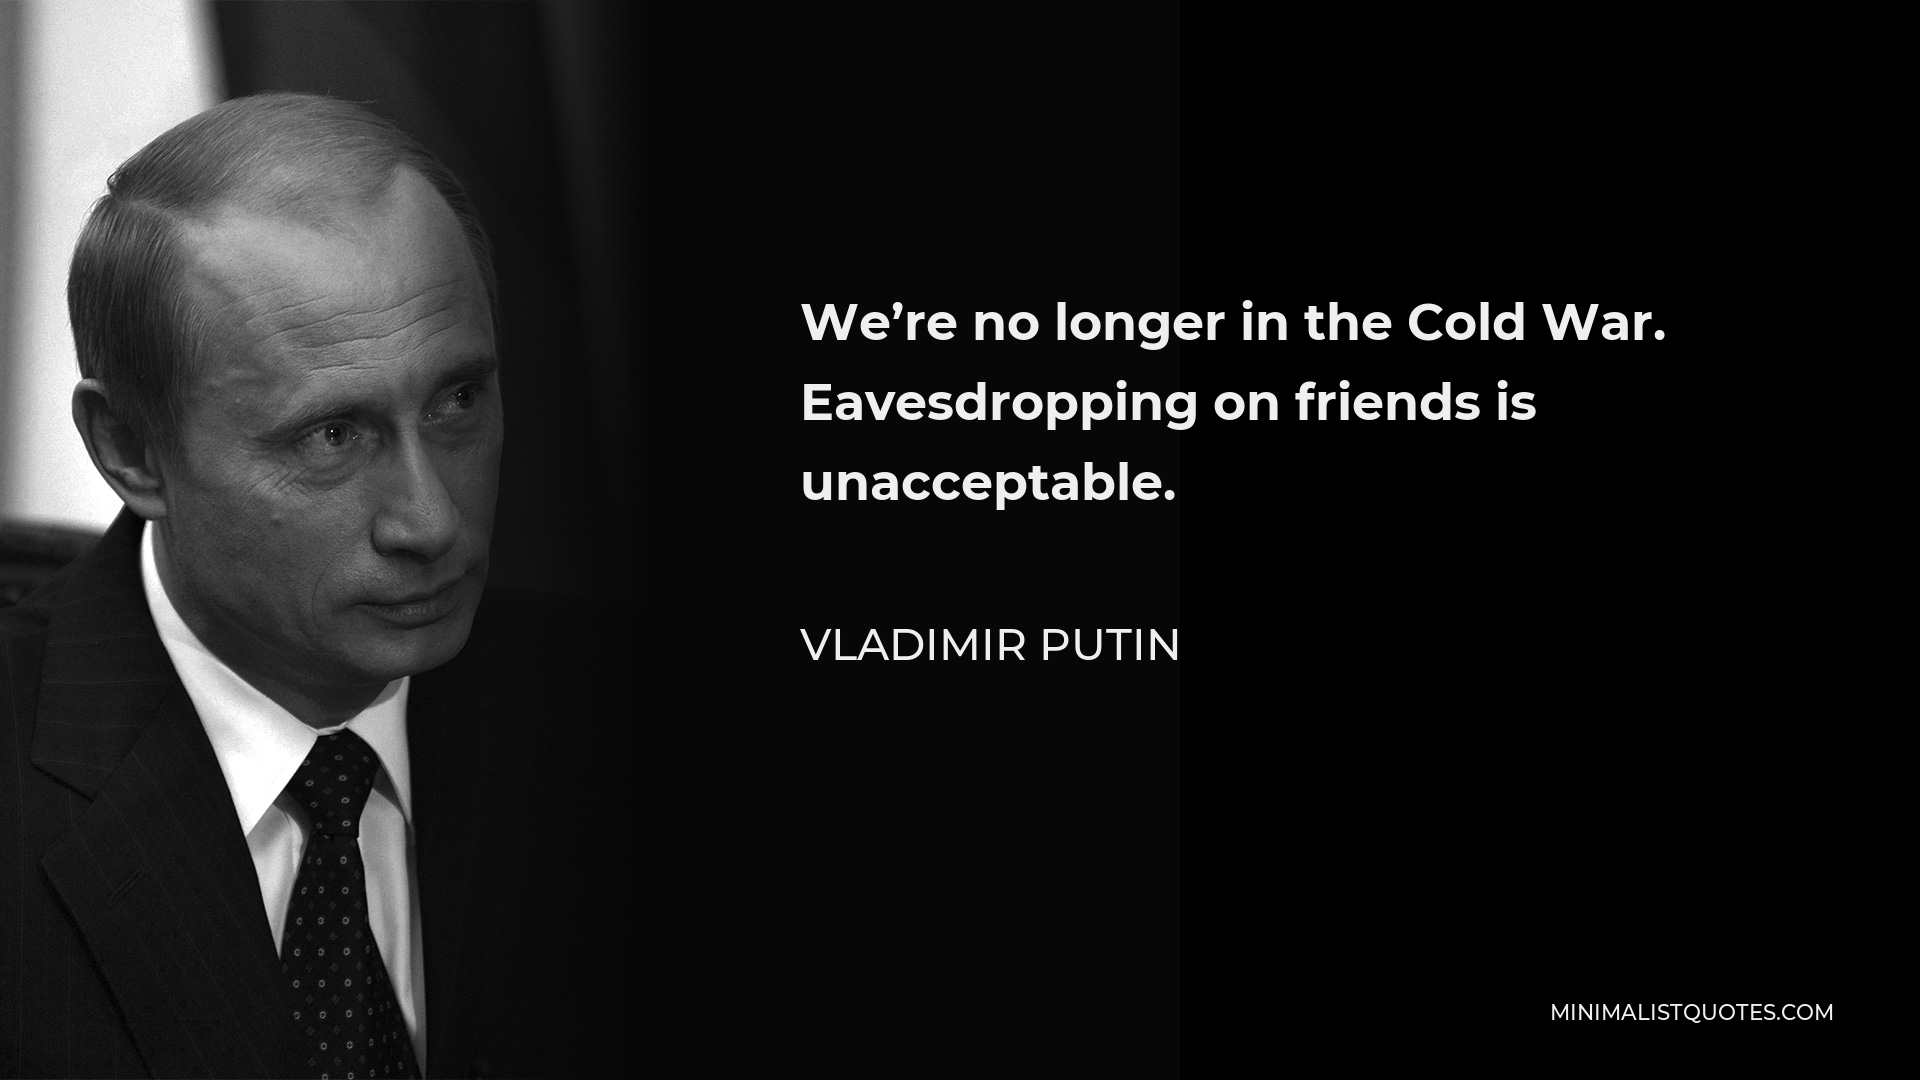 Vladimir Putin Quote - We’re no longer in the Cold War. Eavesdropping on friends is unacceptable.